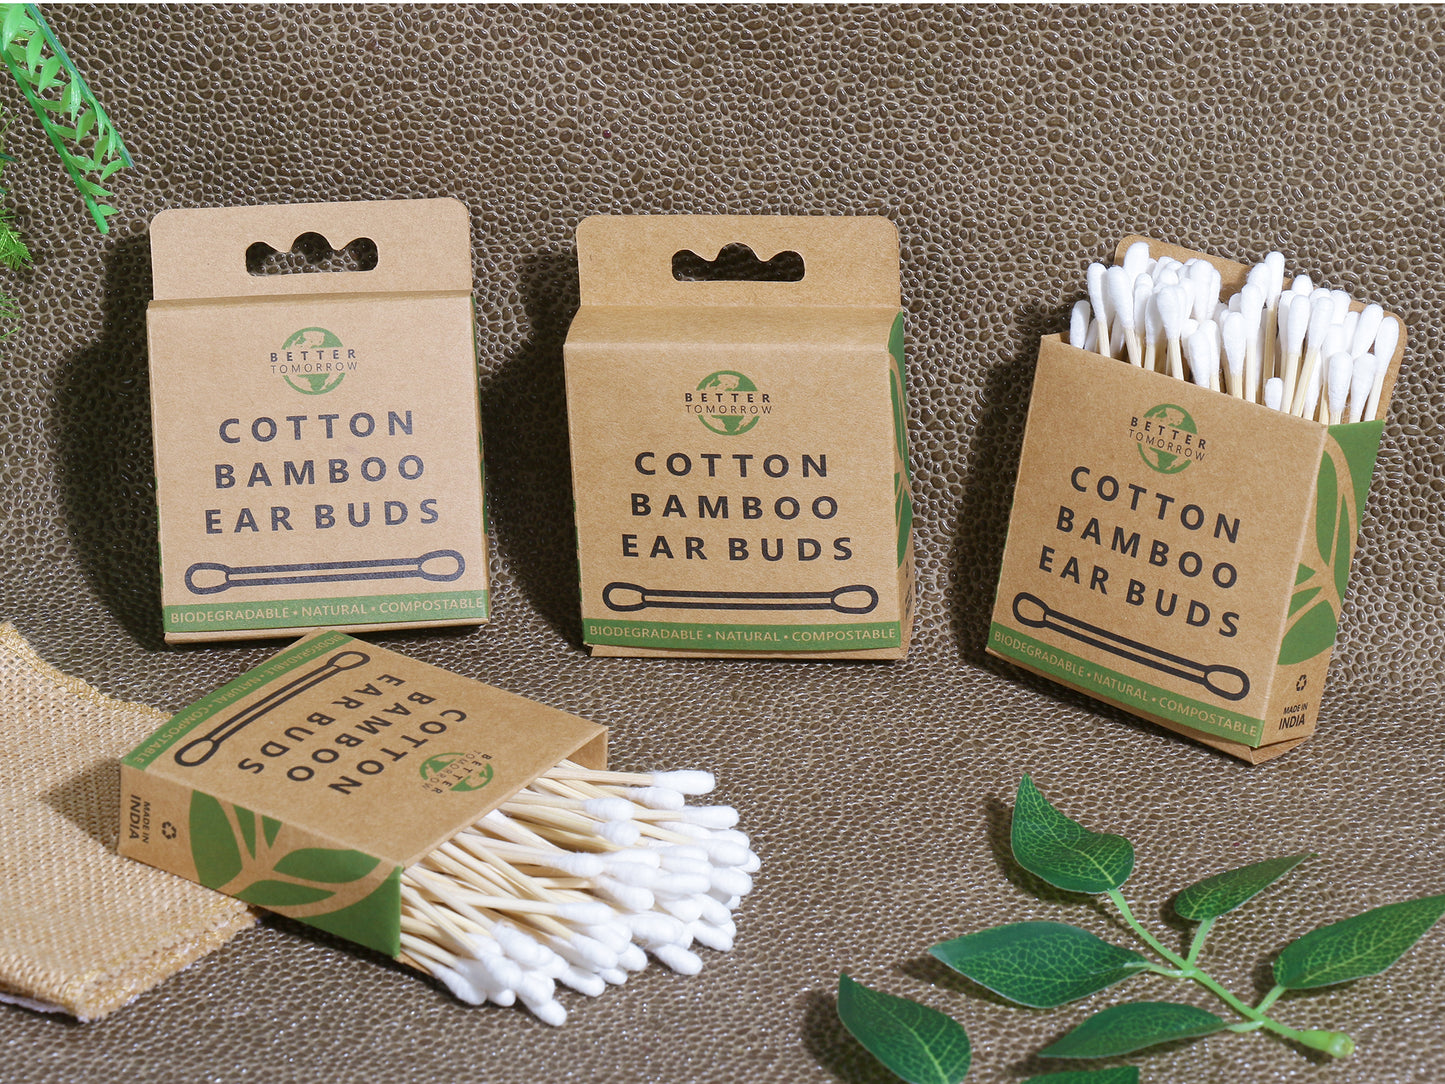 Cotton Bamboo Earbuds (Pack of 4)